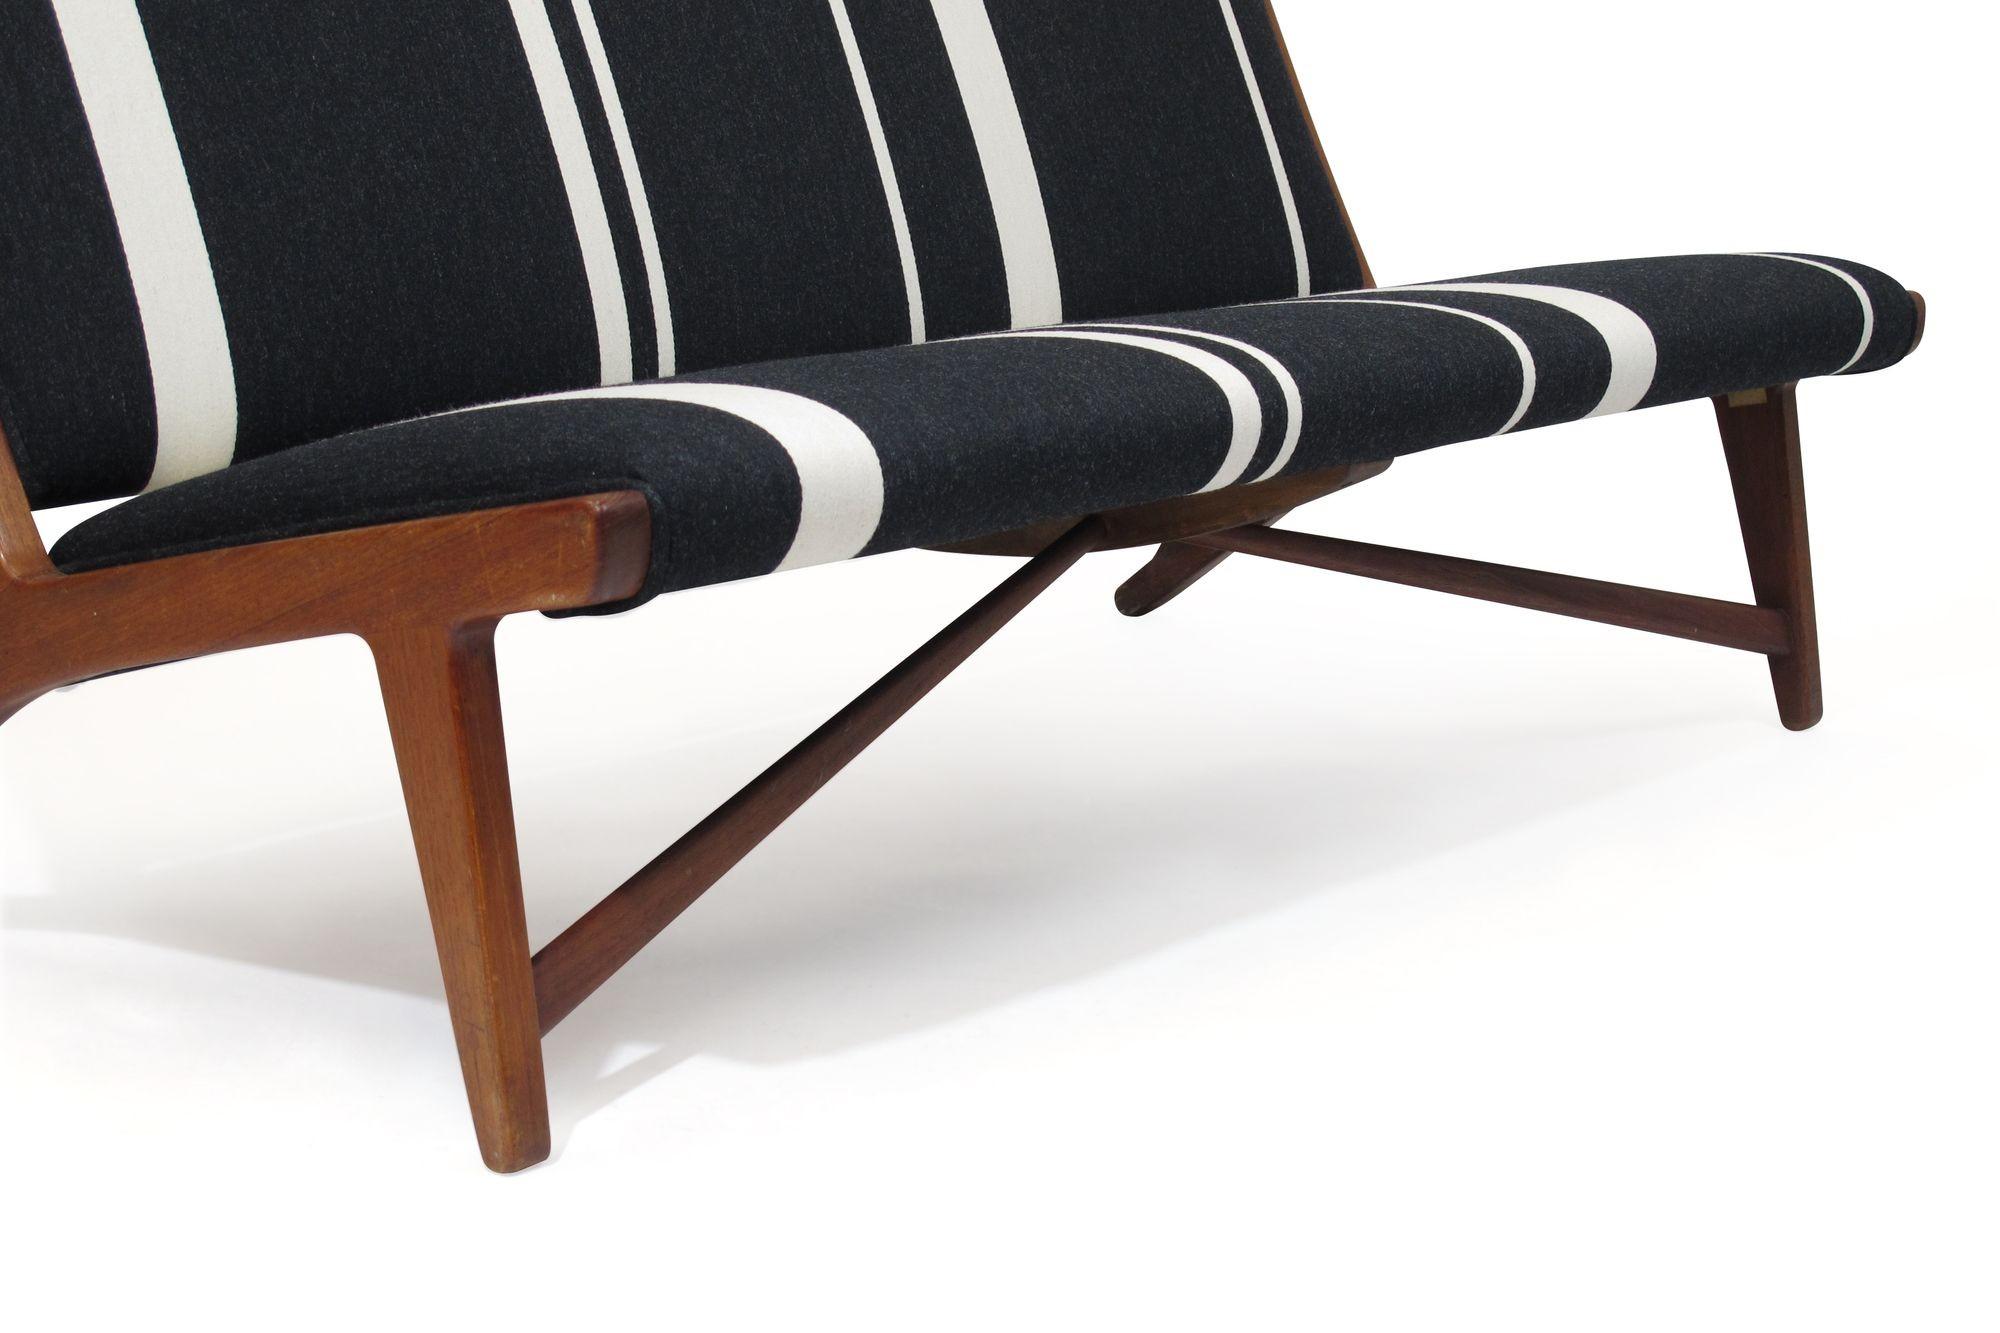 Danish armless bench designed by Hans Wegner. Model JH555, crafted of a solid teak frame with angled cross stretcher. Newly upholstered in classic Scandinavian striped wool textile by Tove and Edvard Klint Larsen.
 
This bench was designed by Hans